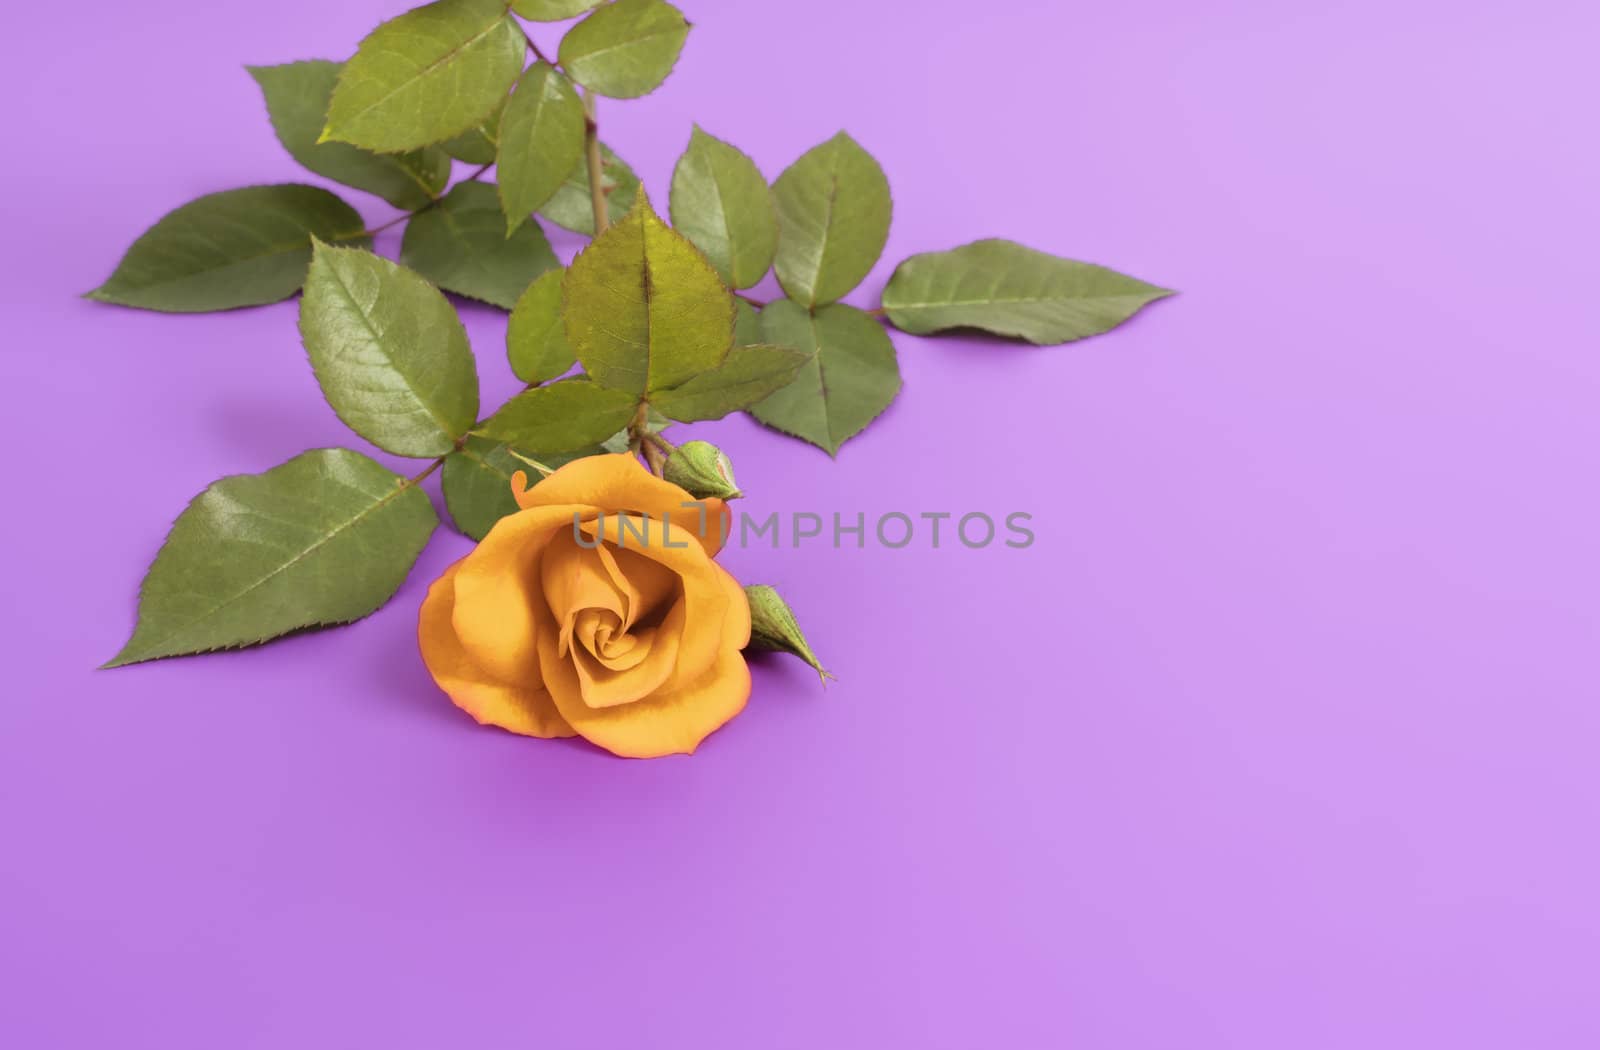 An image of a nice yellow rose on purple background